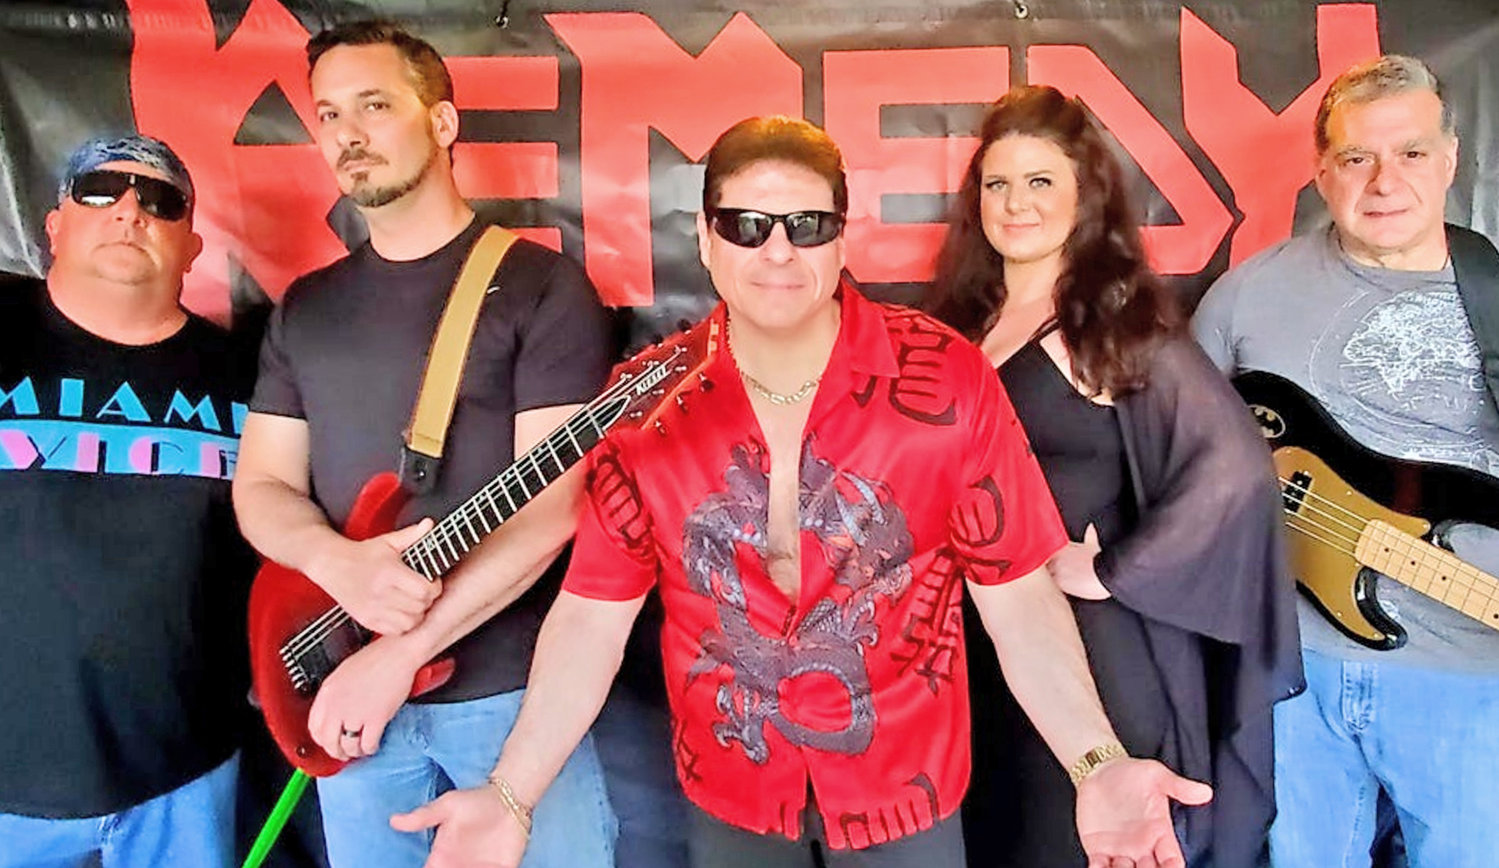 Remedy plays live at The Town of Marcy Food Truck and Concert Series’ Fallfest Oct 1 at the Marcy Town Park.